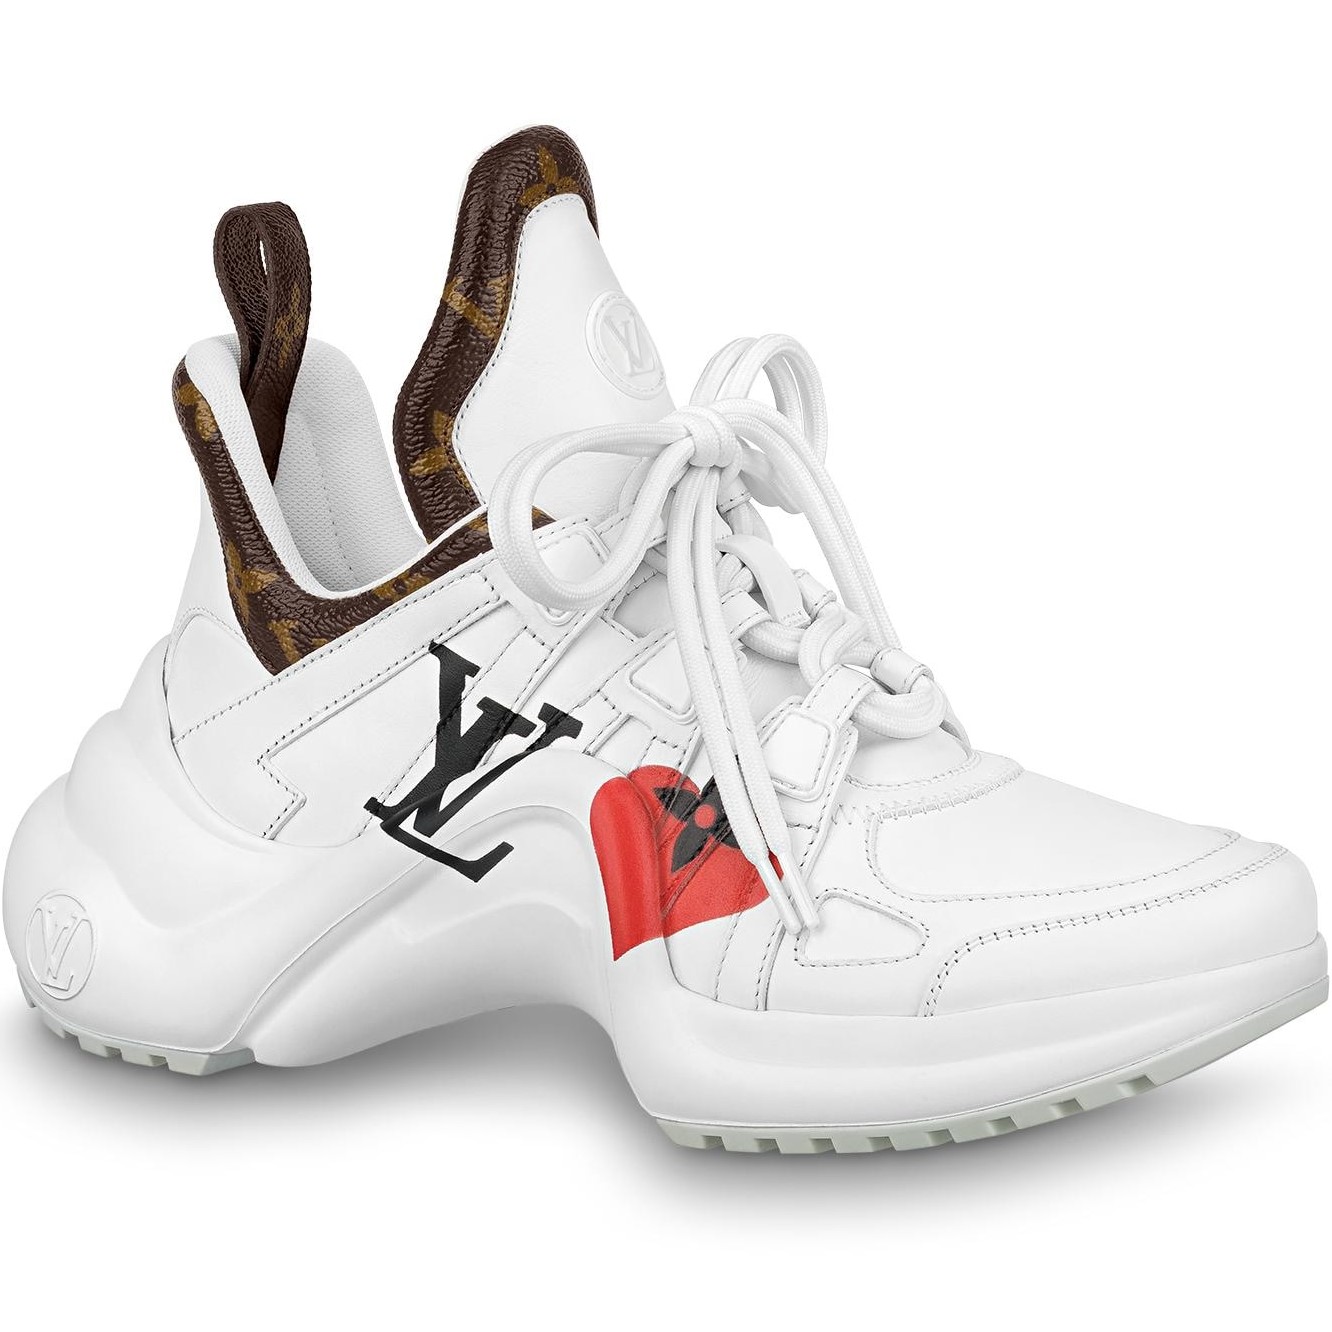 GIÀY THỂ THAO ĐẾ CONG LV NỮ LOUIS VUITTON GAME ON LV ARCHLIGHT SNEAKER IN WHITE 1A8MRP 5